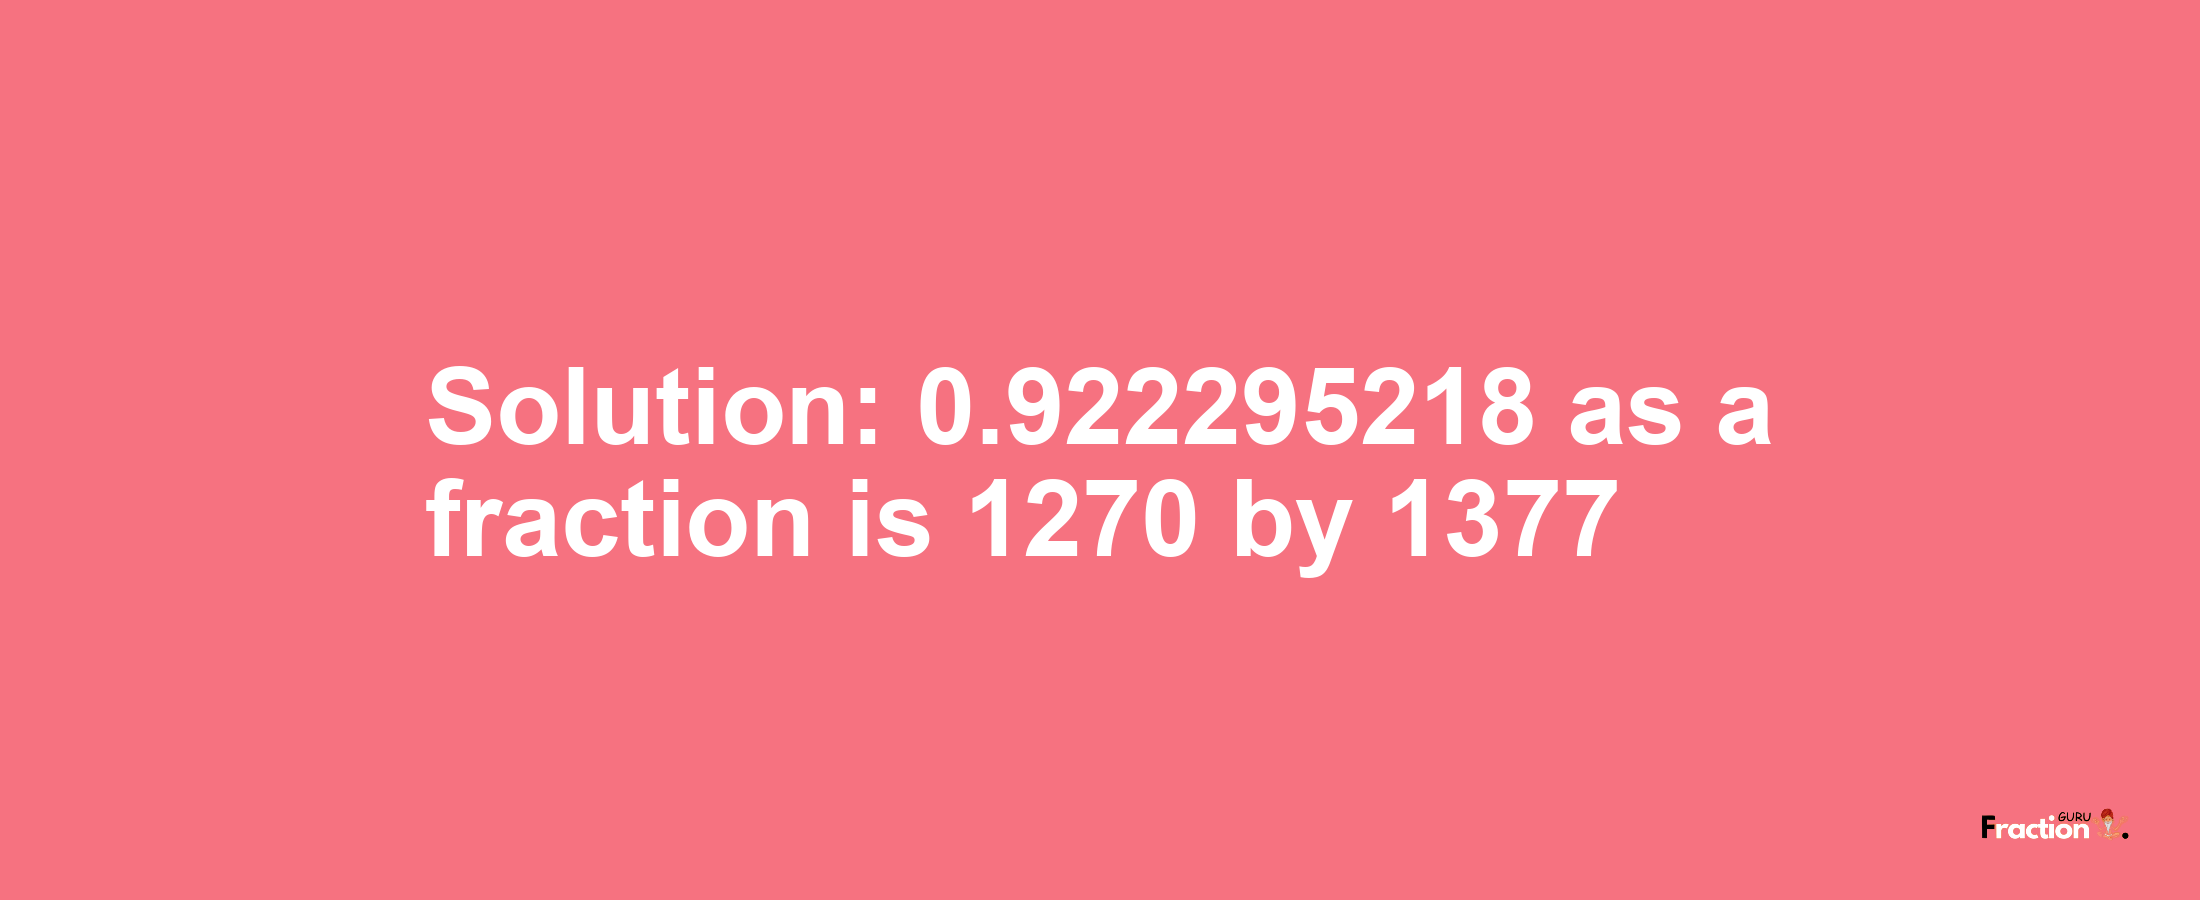 Solution:0.922295218 as a fraction is 1270/1377